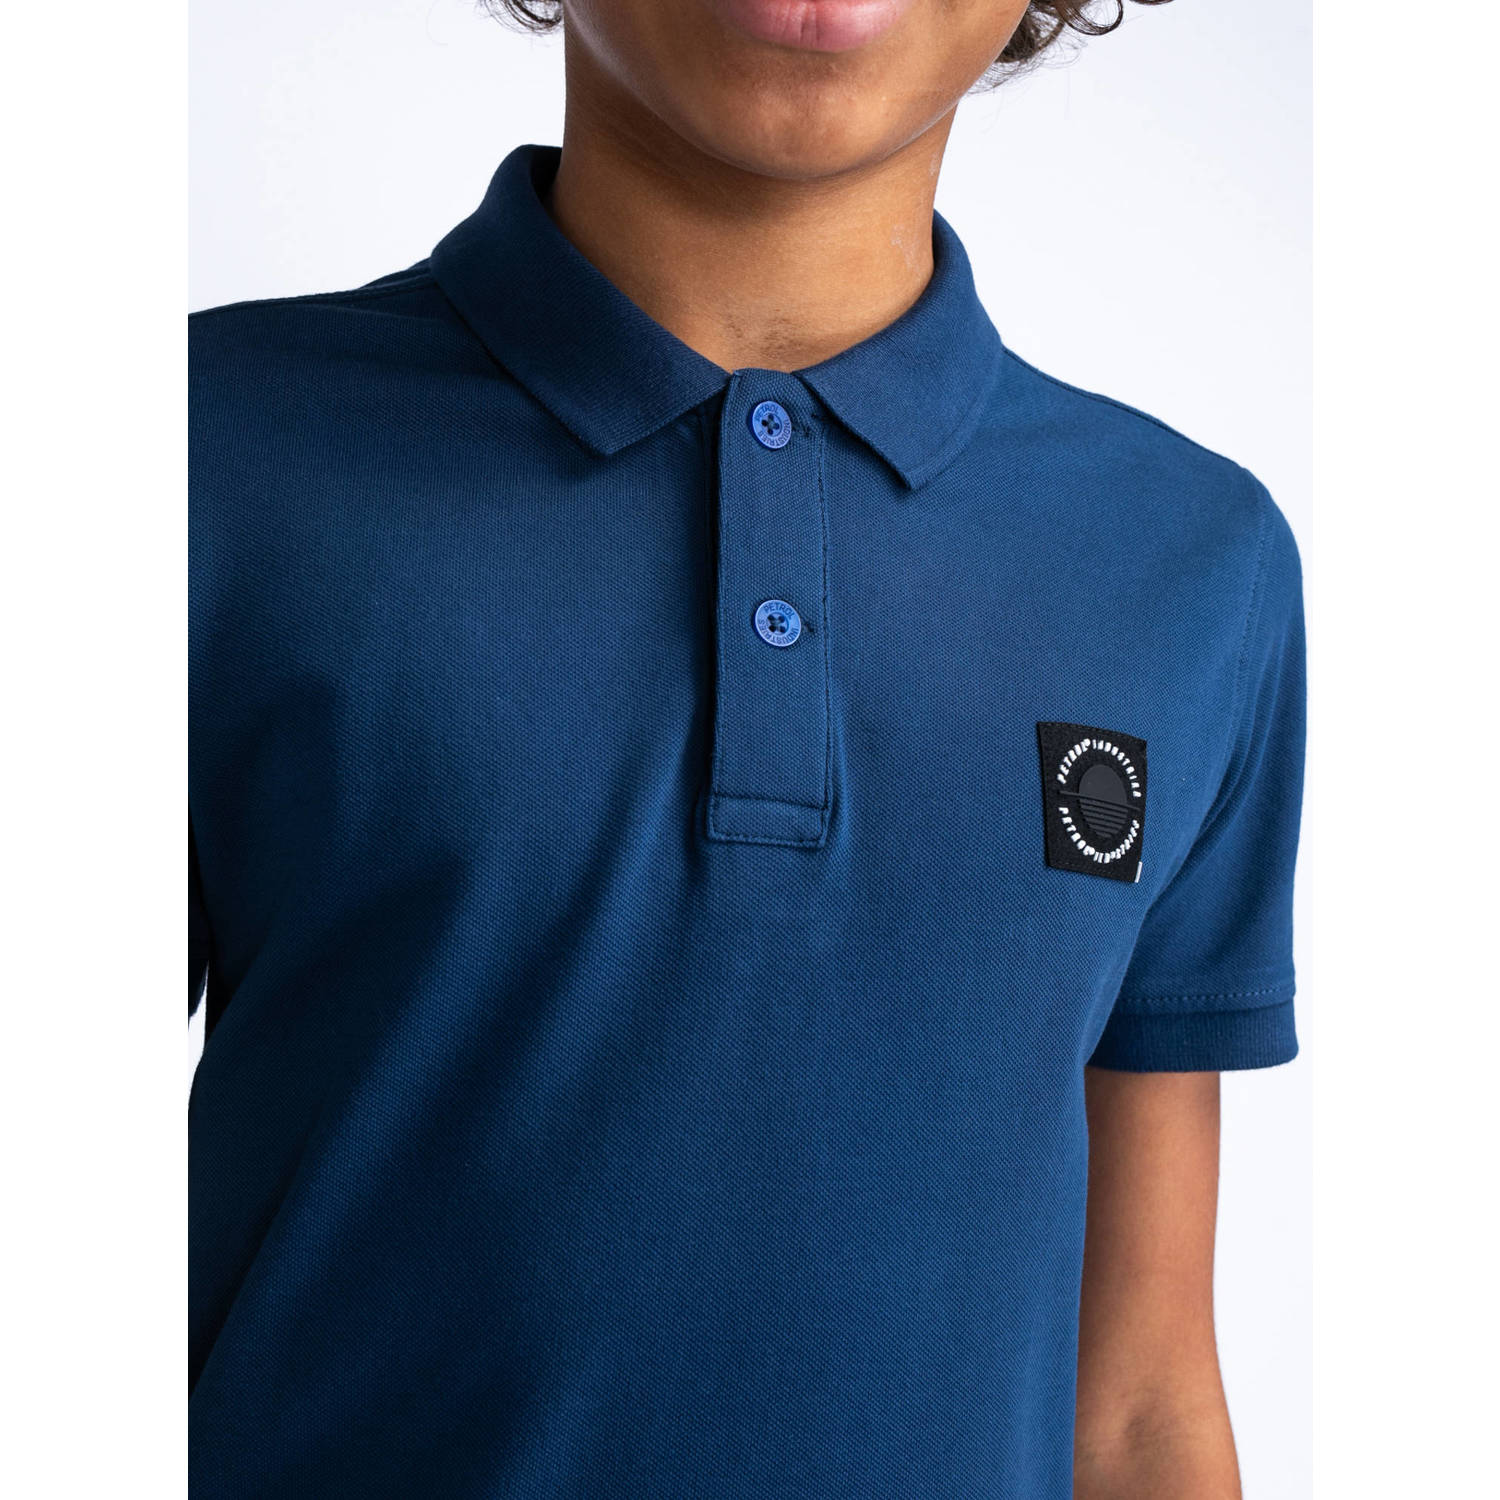 Petrol Industries polo donkerblauw